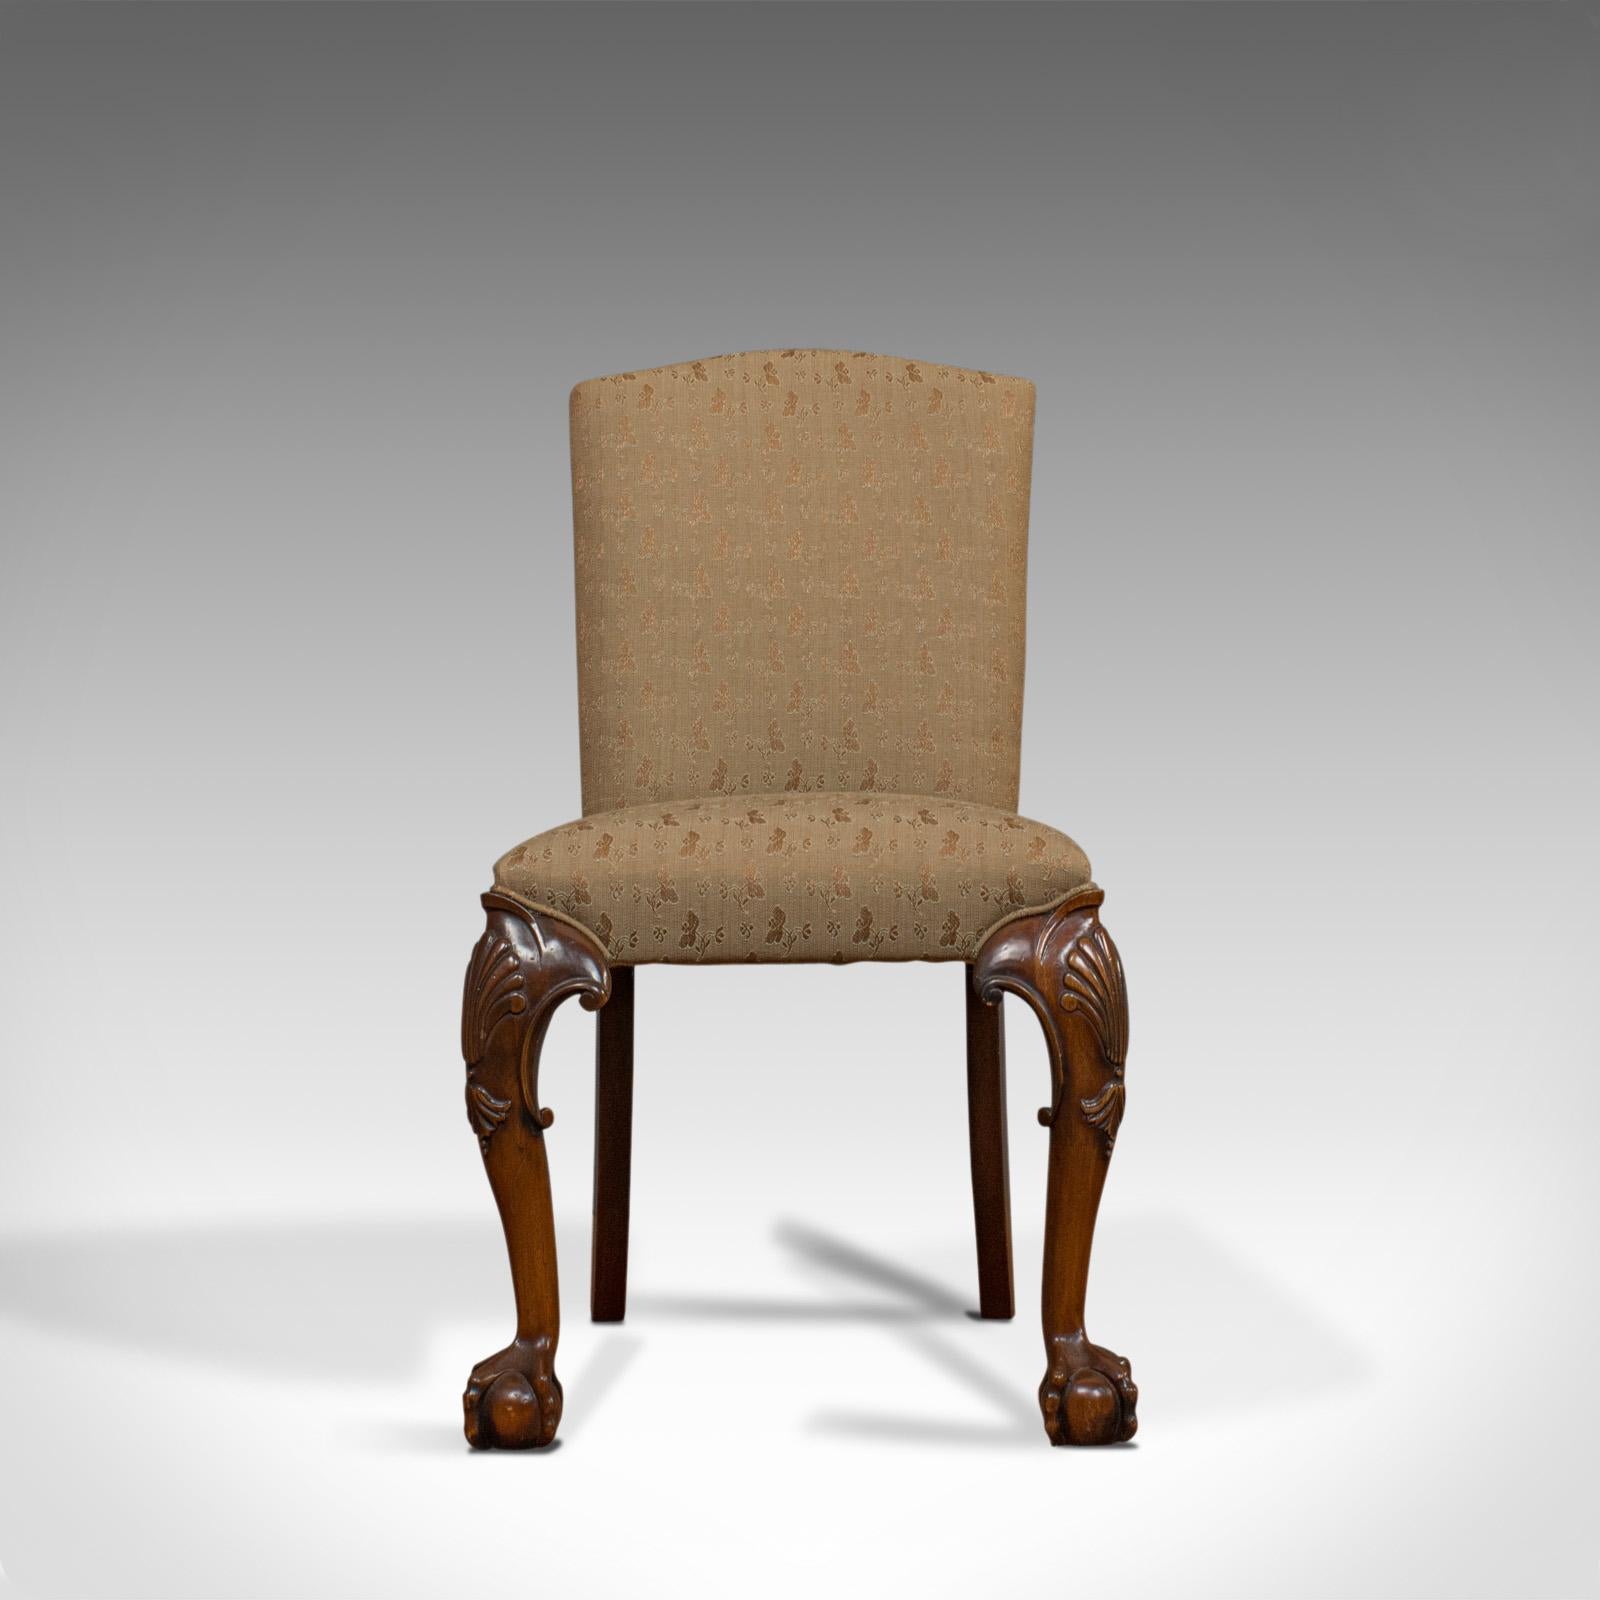 This is a vintage side chair. An English, mahogany Georgian-revival drawing room chair and dating to the 20th century.

Desirable color and patina to the mahogany frame
Quality carved detail throughout
Traditionally stuffed and finished
Fabric